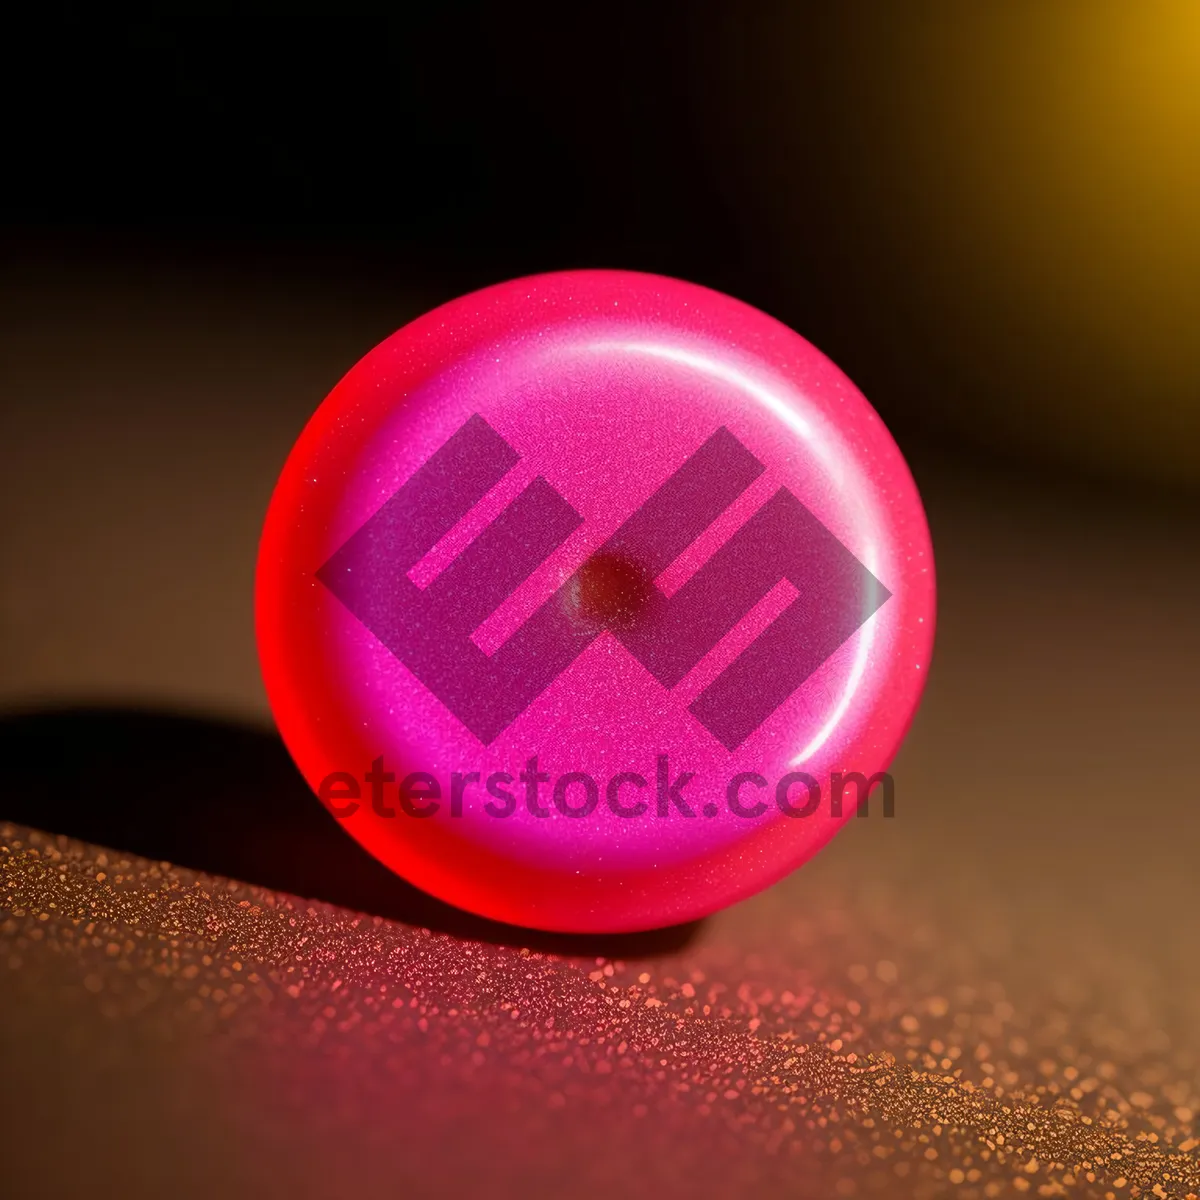 Picture of Shiny orange button with glass reflection.